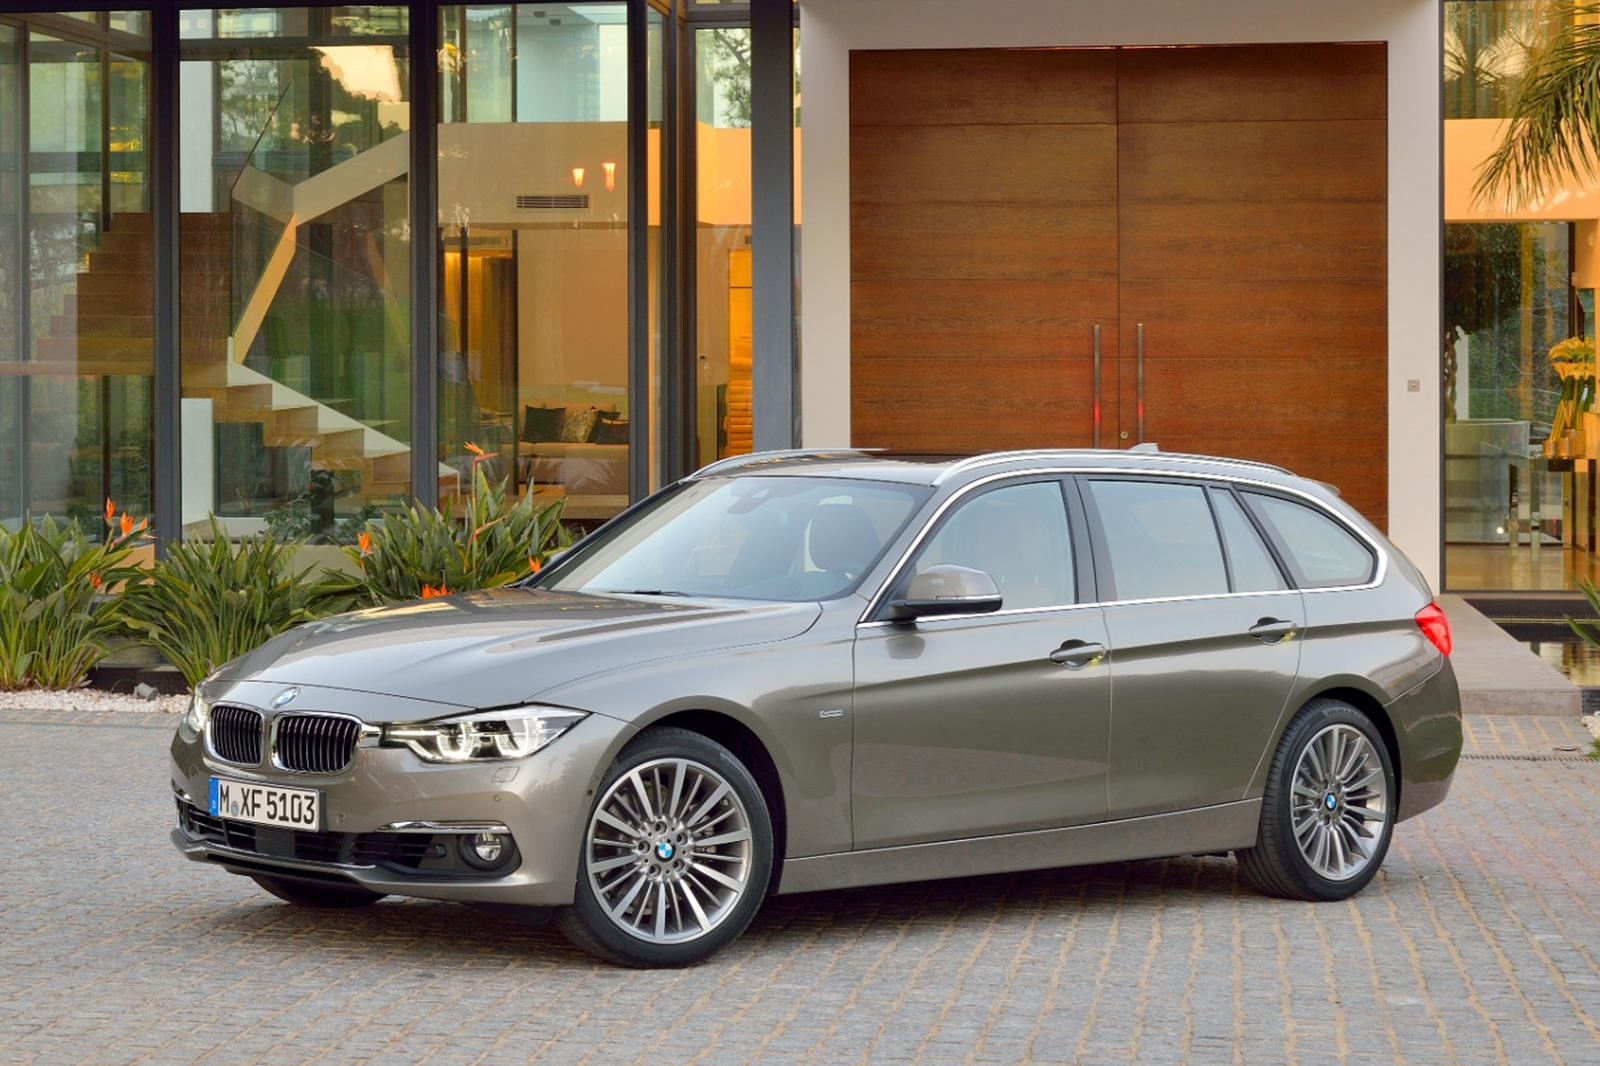 2019 BMW 3 Series Wagon Front Three-Quarter Left Side View